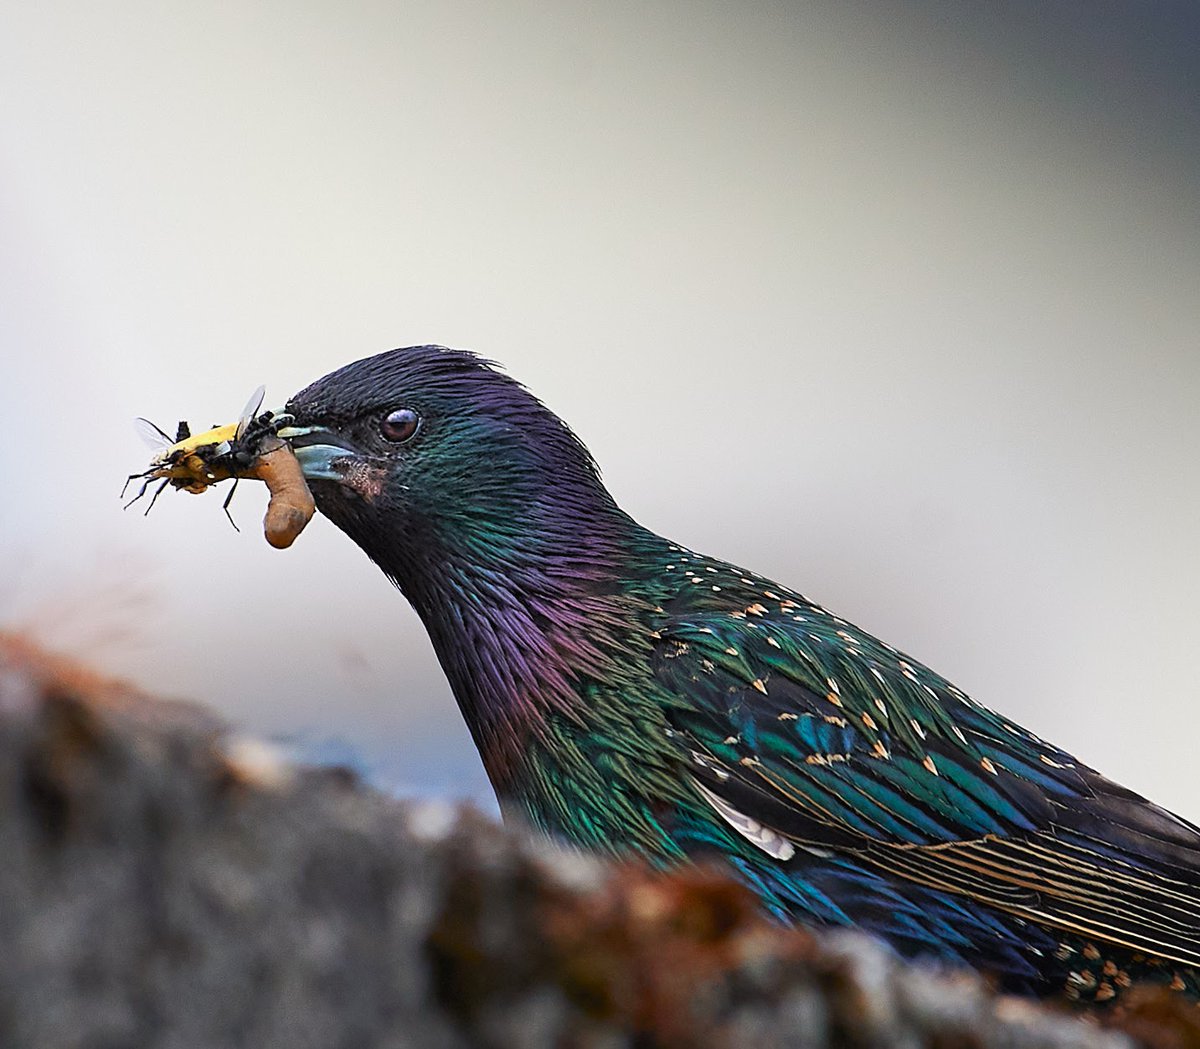 One busy Starling.